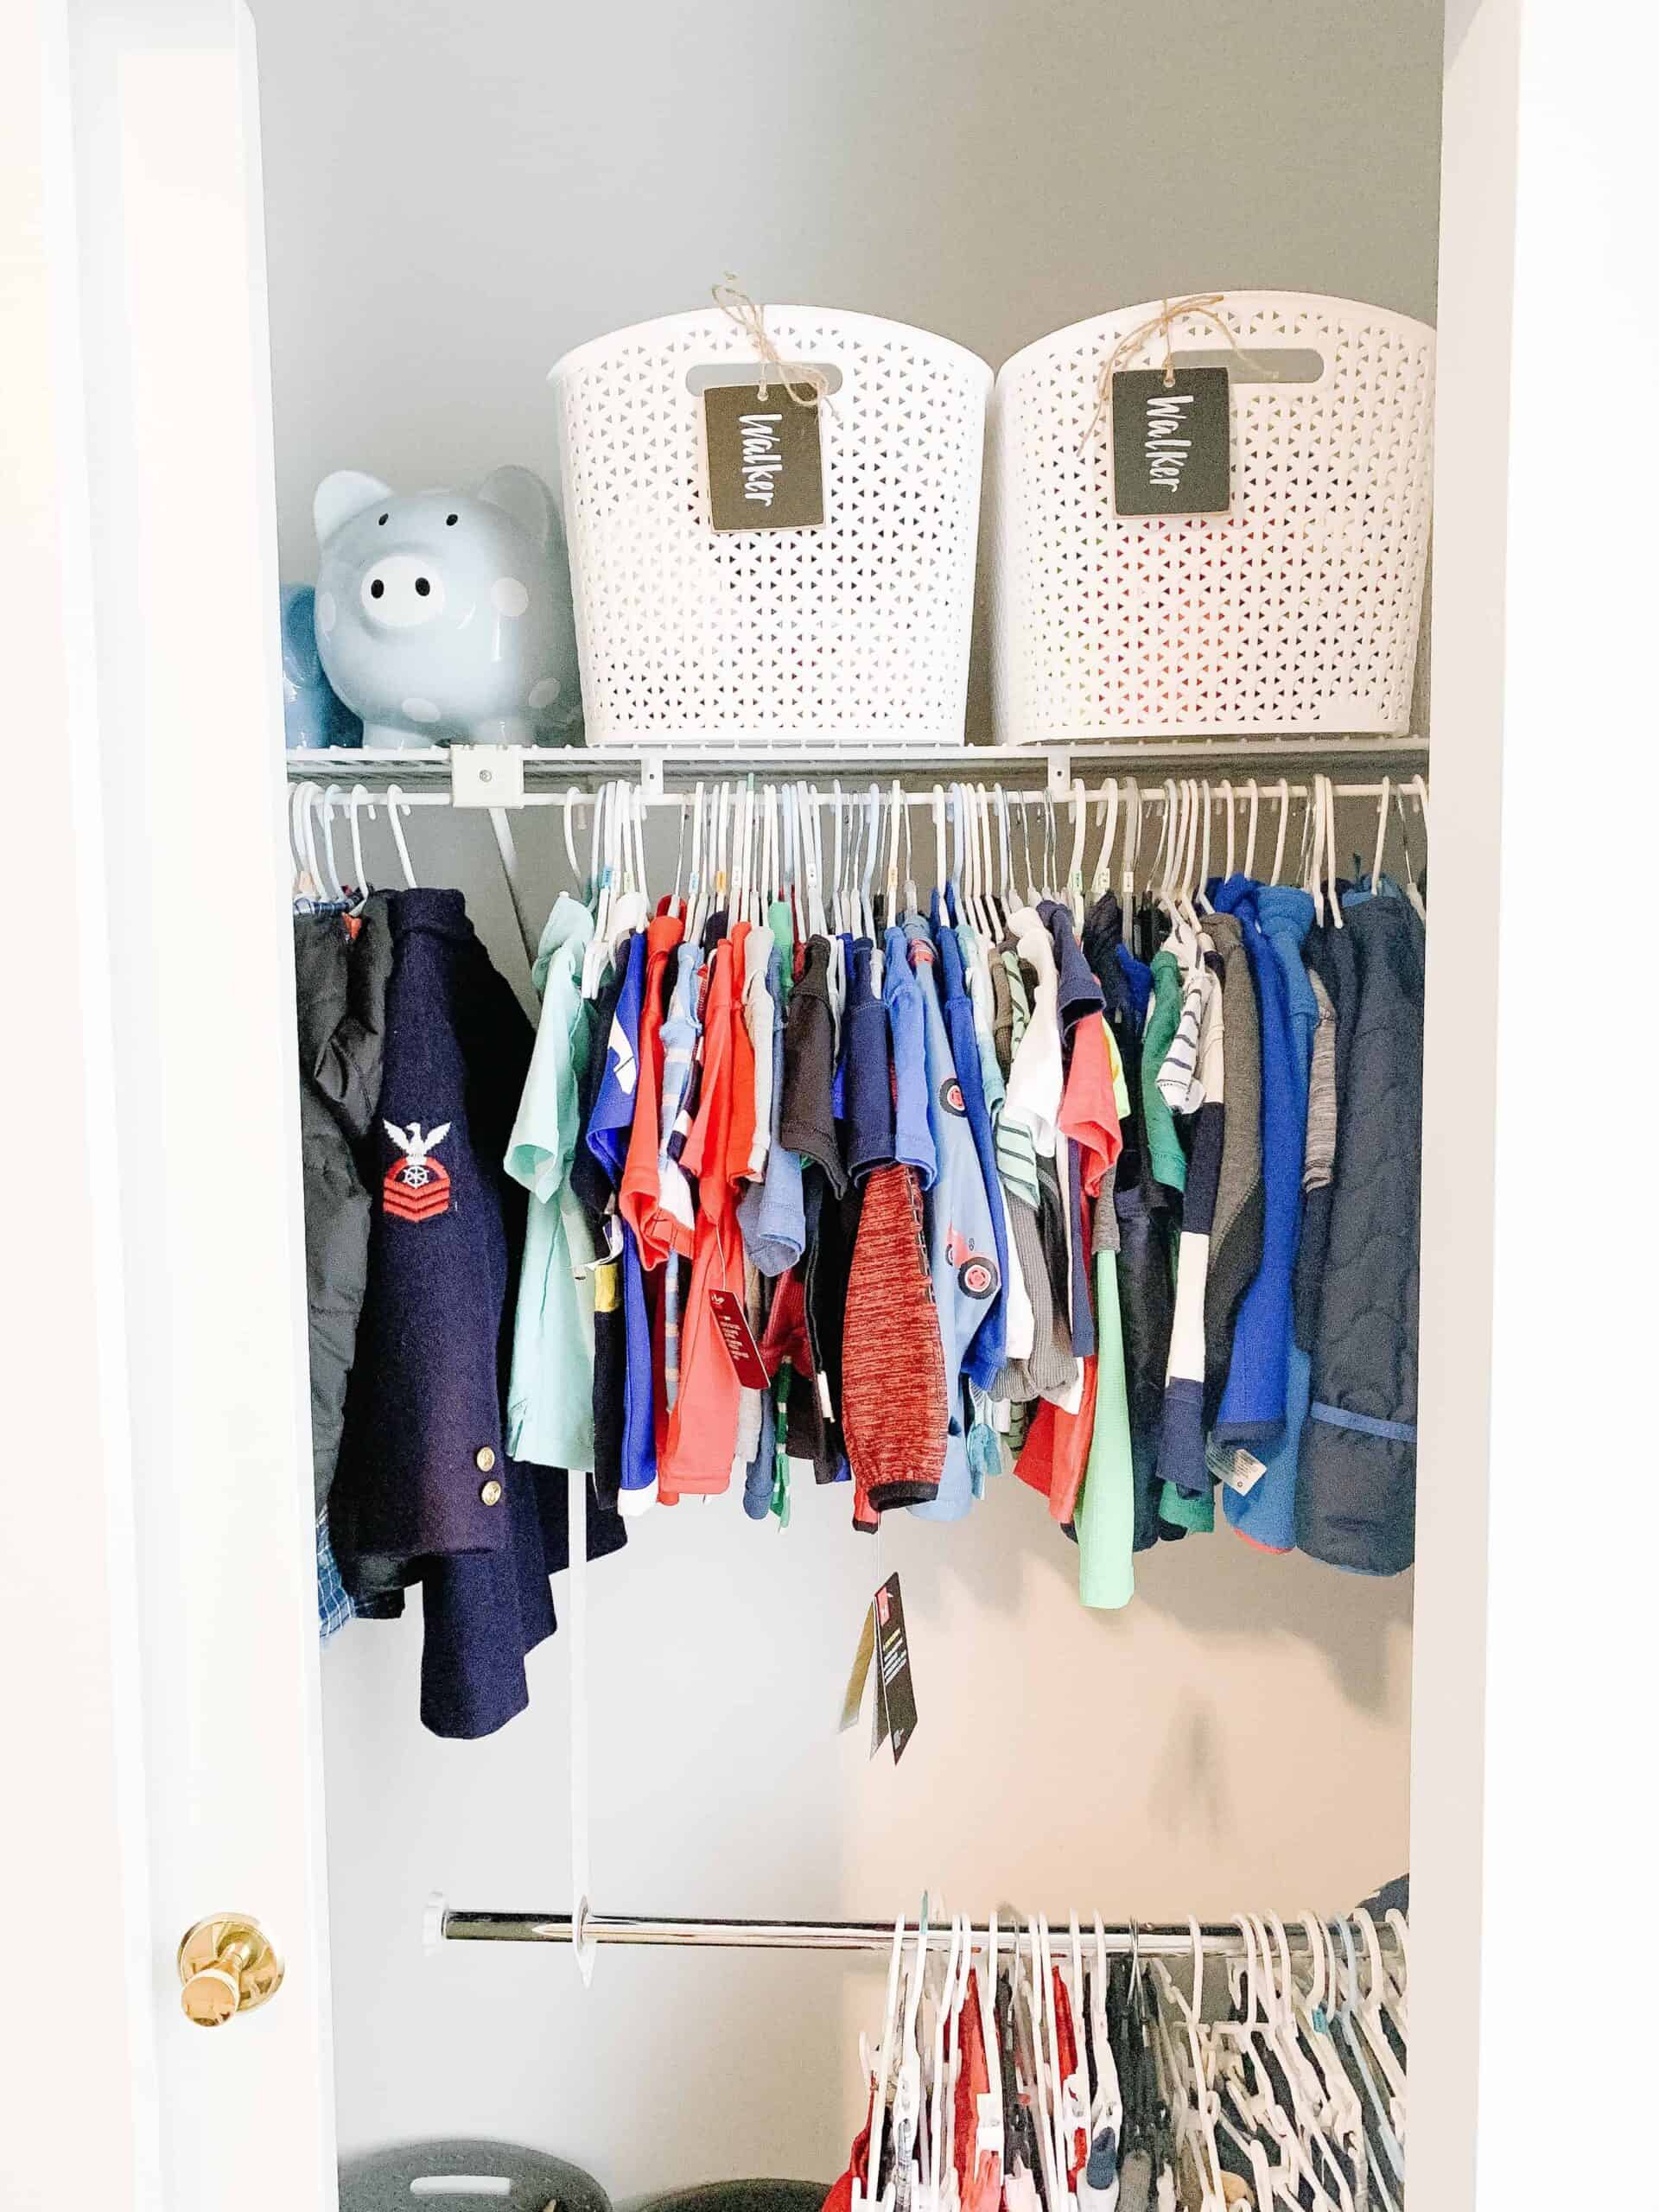 Shared sibling closet with organizational items